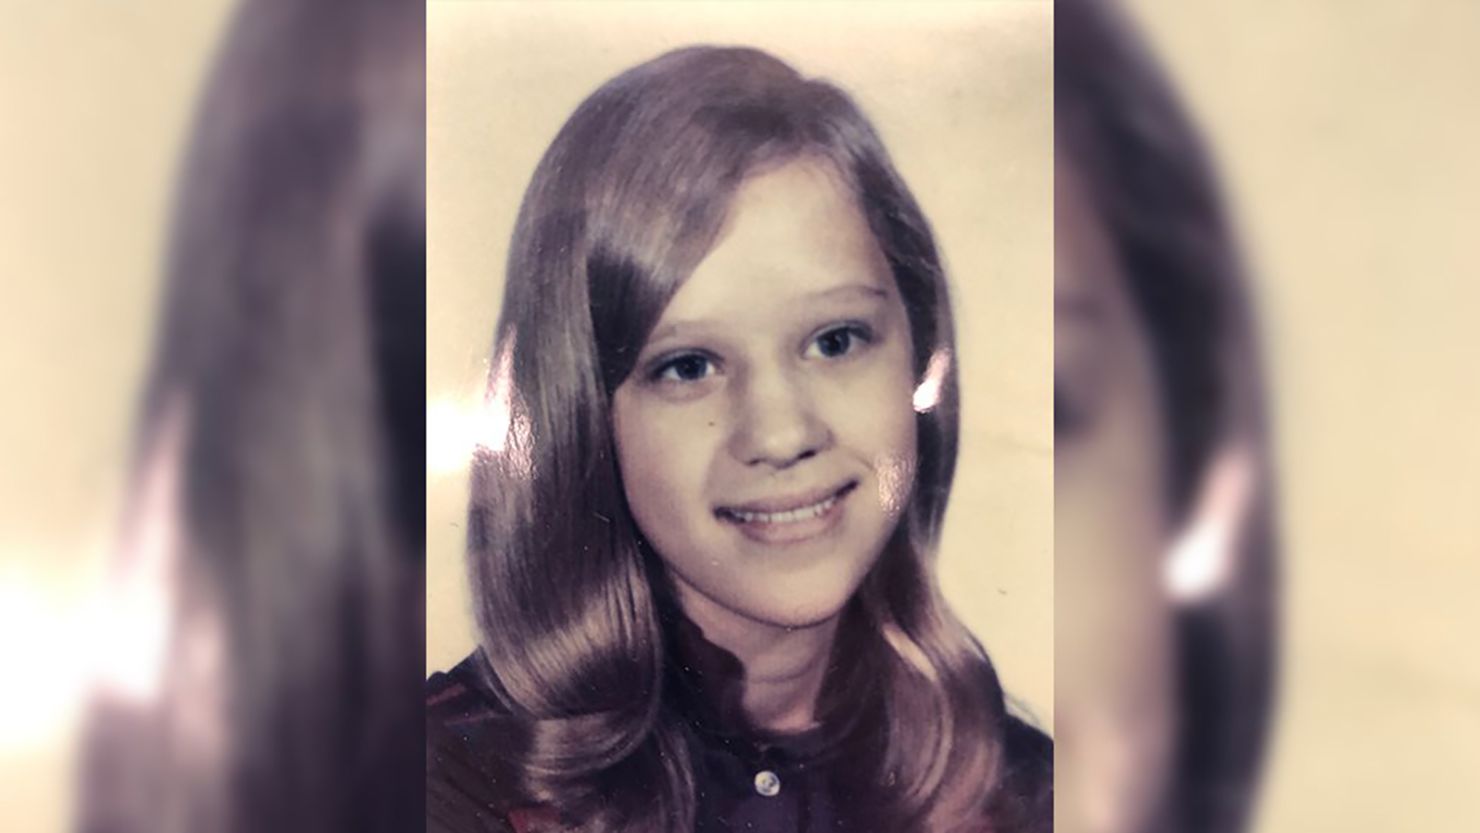 A 76-year-old man was arrested on June 2 in connection with the 1972 stabbing death of 15-year-old Julie Ann Hanson